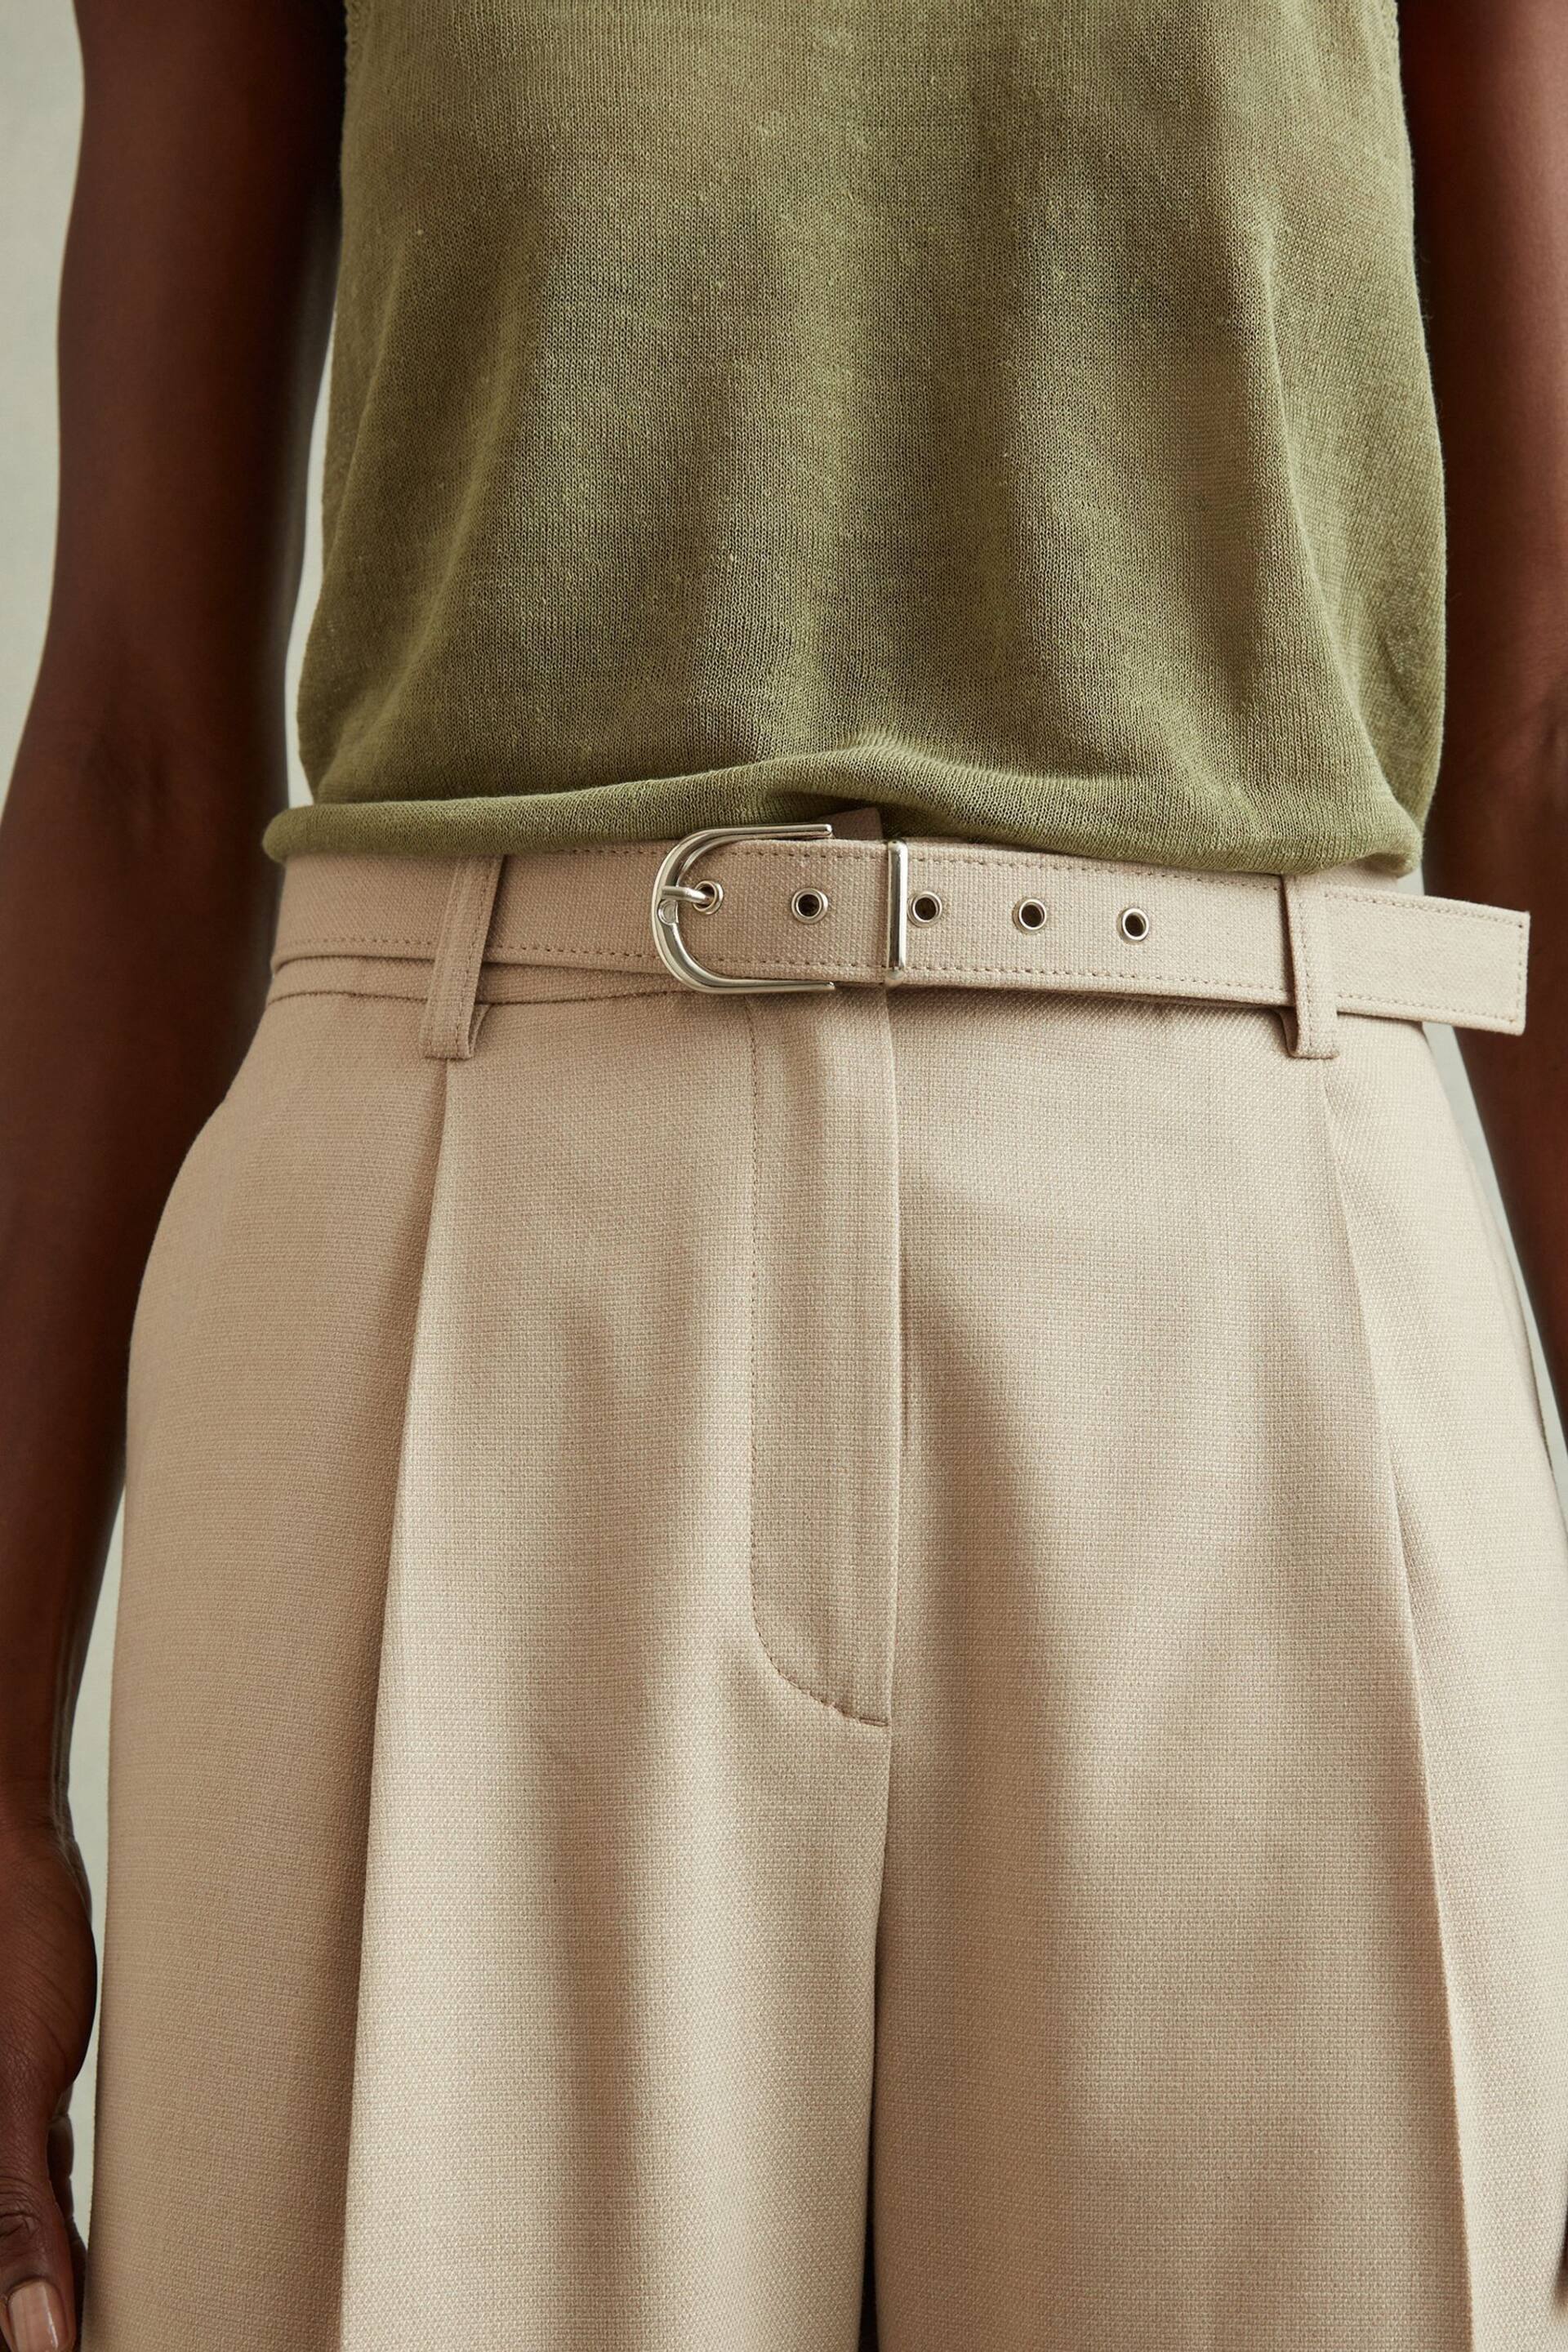 Reiss Neutral Freja Petite Tapered Belted Trousers - Image 4 of 7